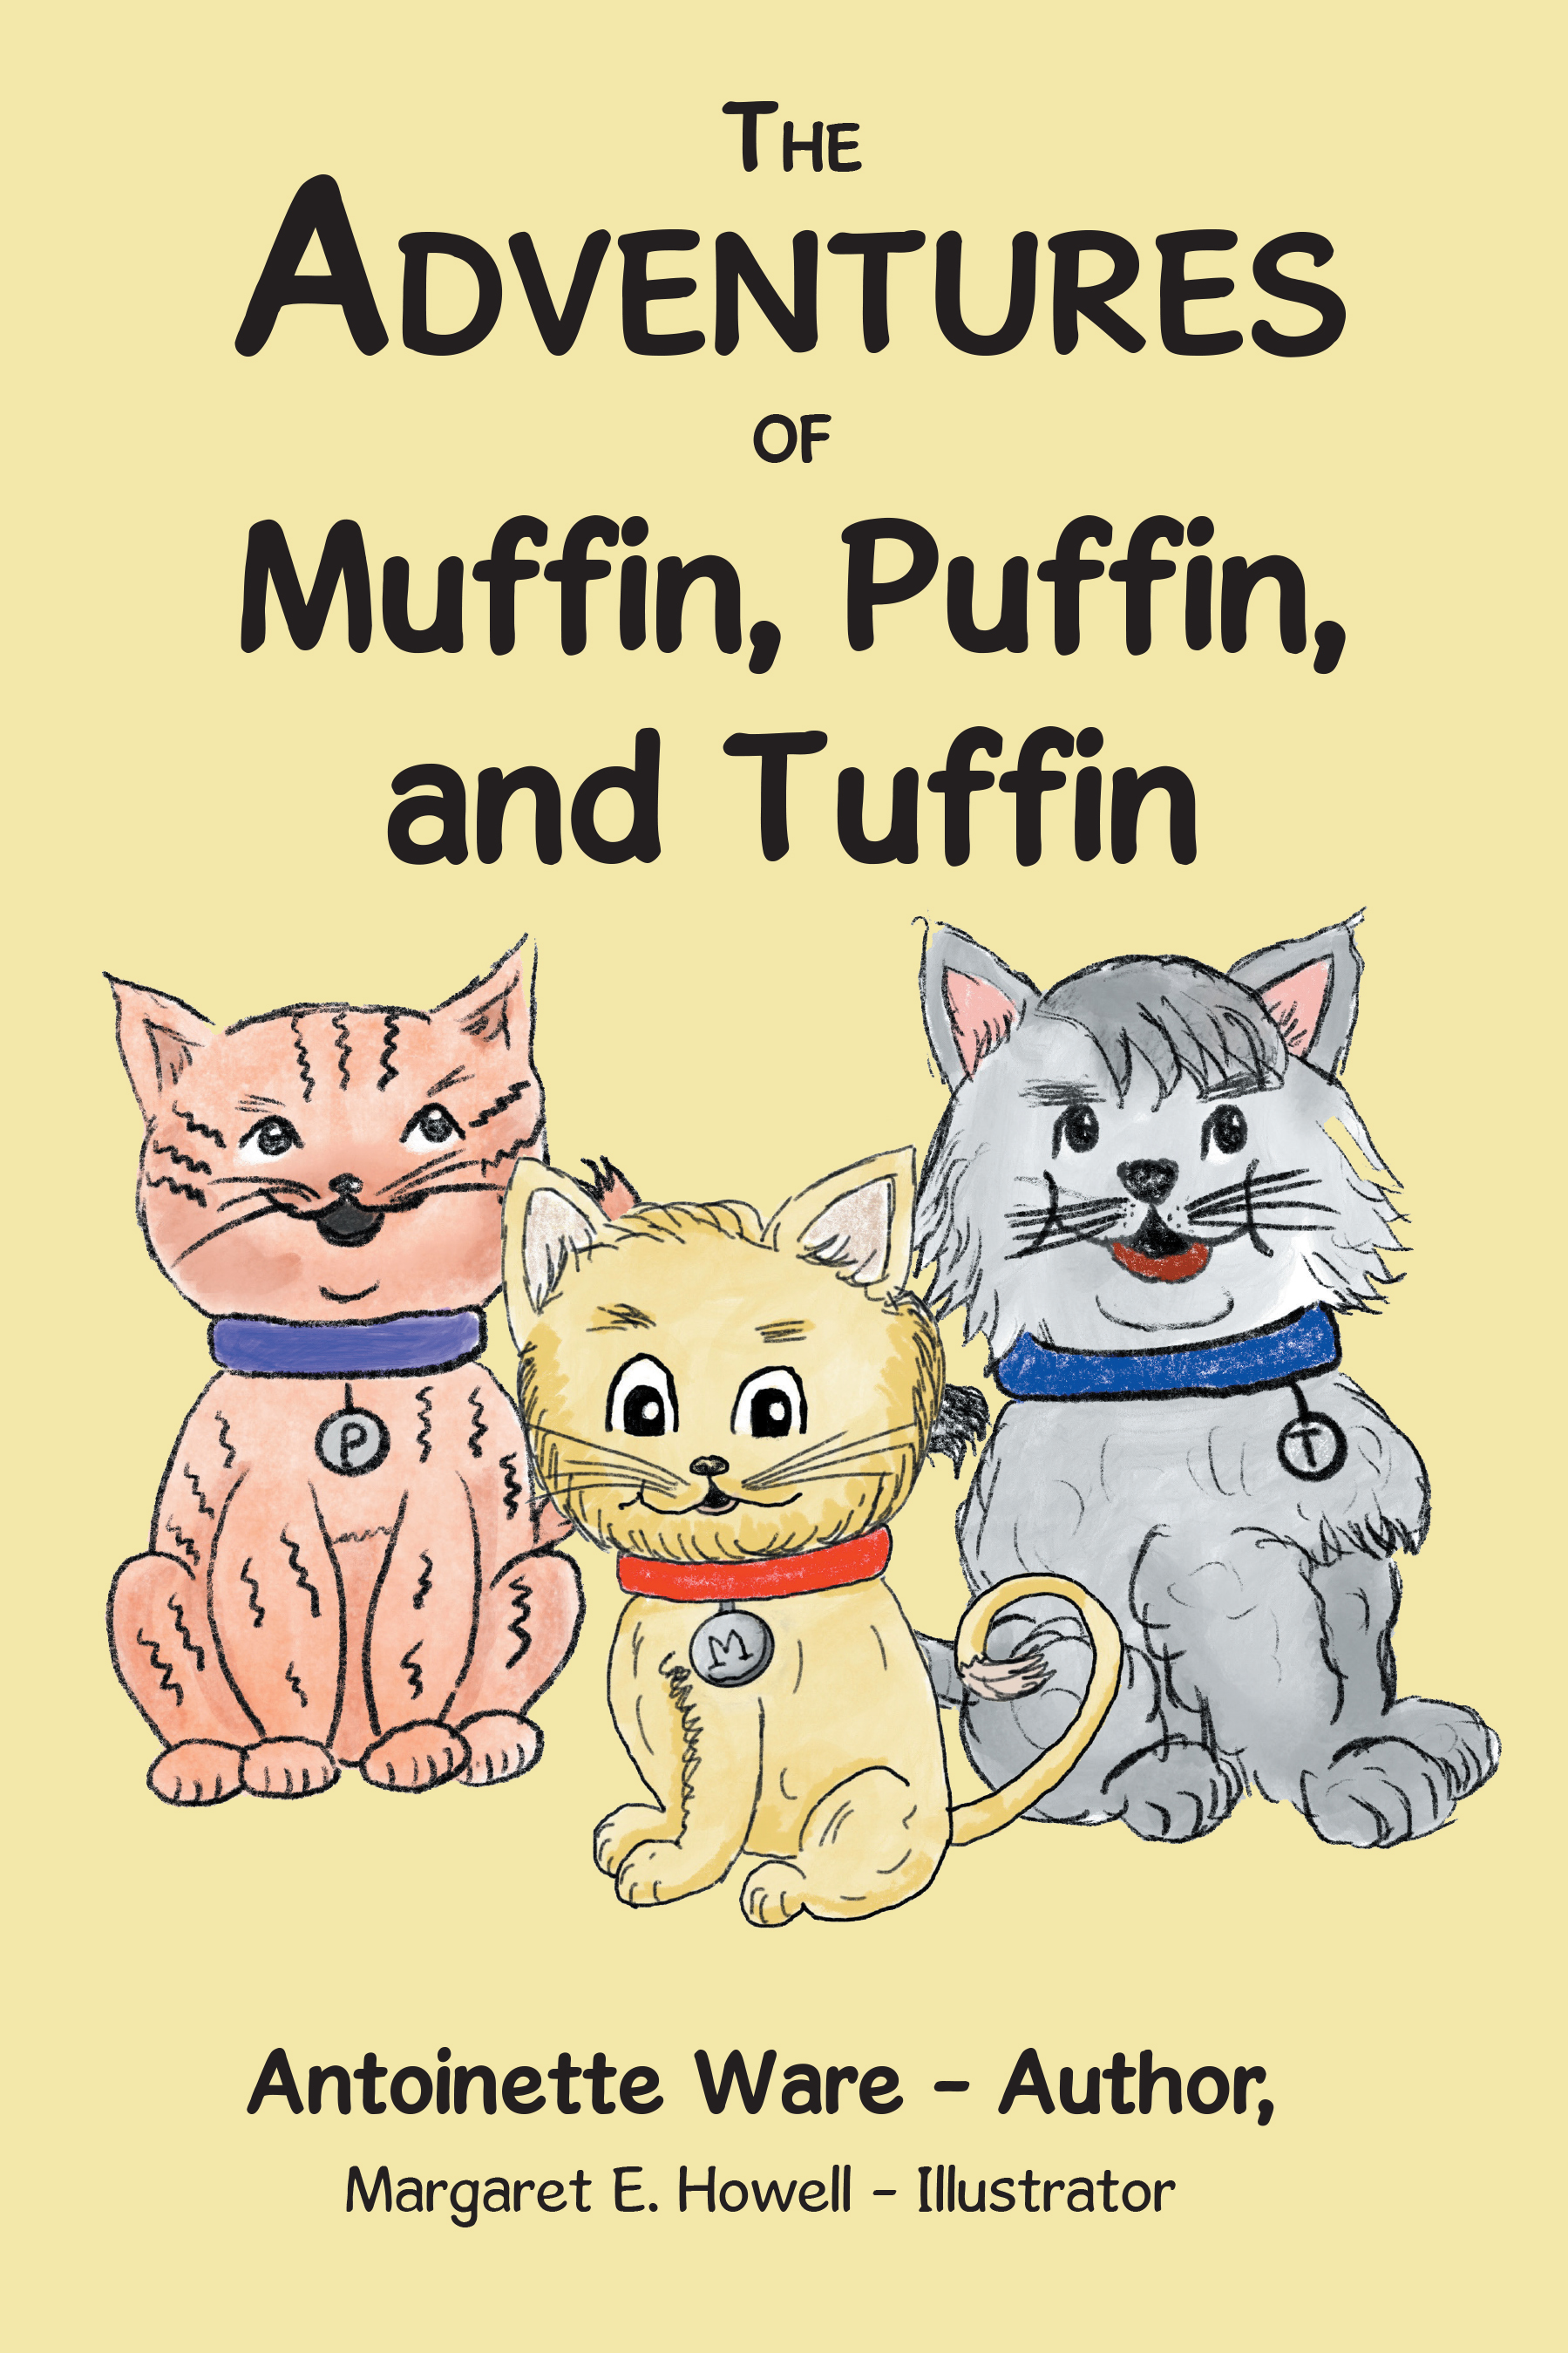 Author Antoinette Ware and Illustrator Margaret E. Howell’s New Book, “The Adventures of Muffin, Puffin, and Tuffin,” Follows the Escapades of Three Adorable Friends